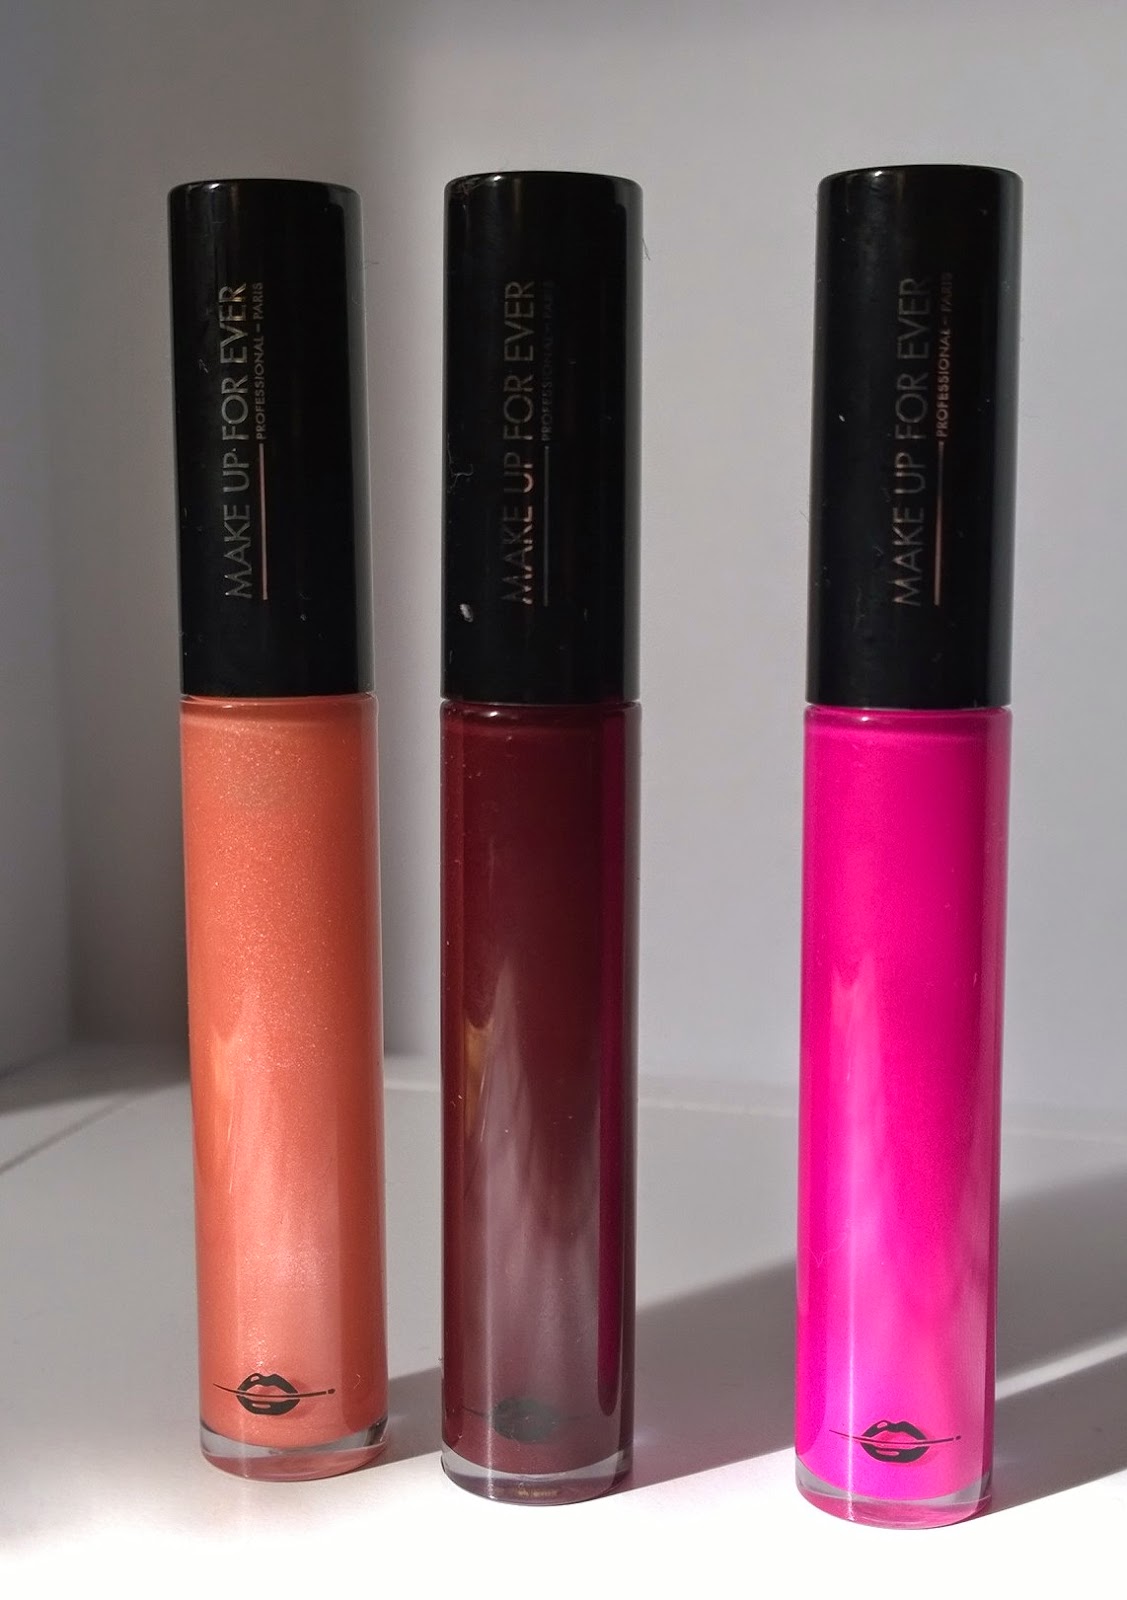 Makeup Forever - Artist Plexi Gloss 102p, 406 and 209